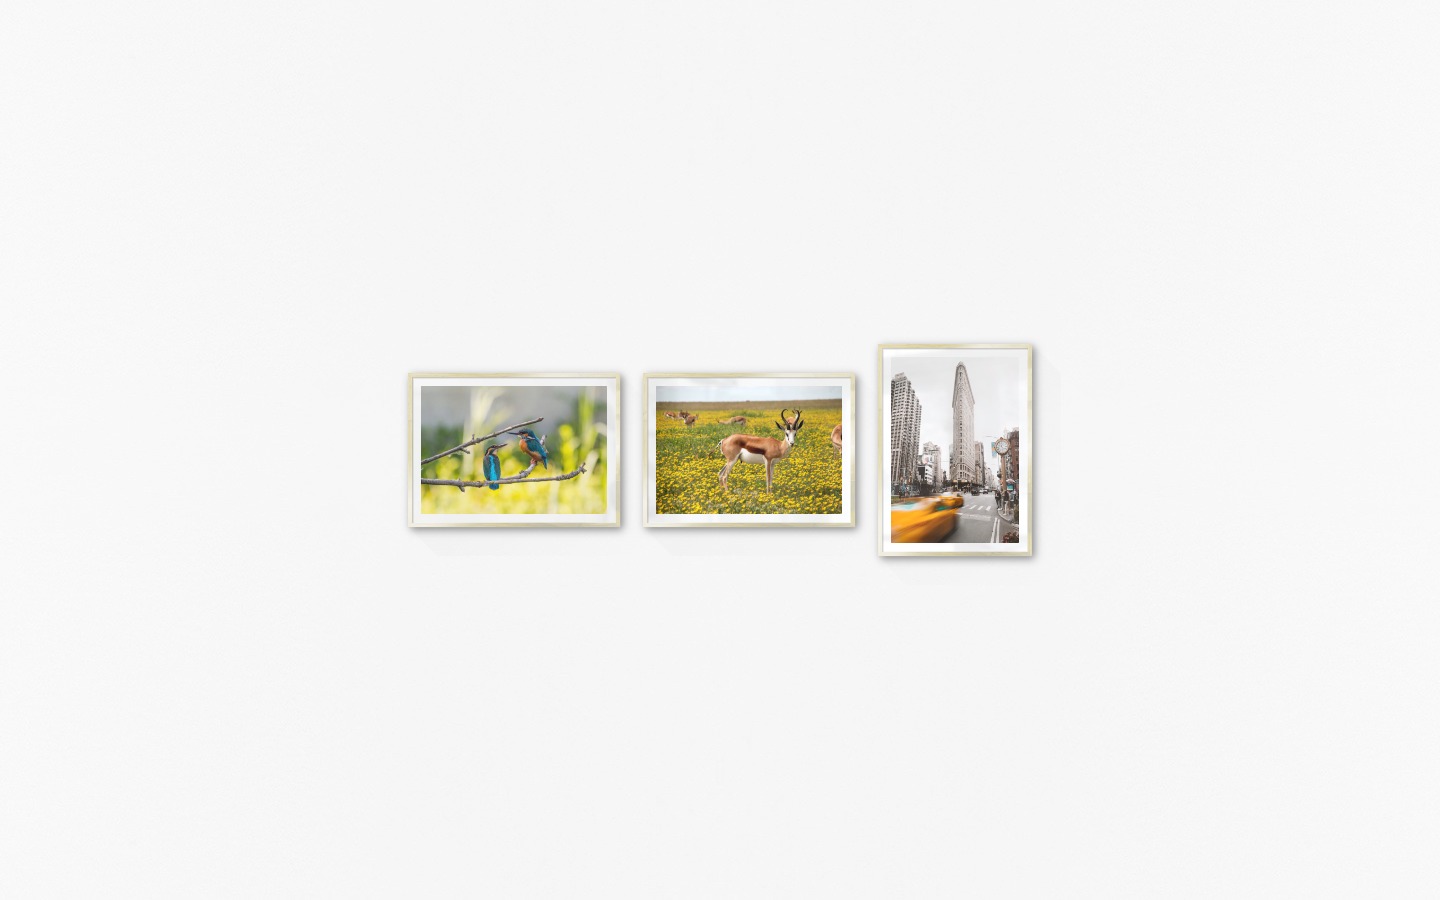 Gallery wall with picture frames in gold in sizes 50x70 with prints "Hummingbirds", "Antelopes in meadow" and "Yellow taxis in town"